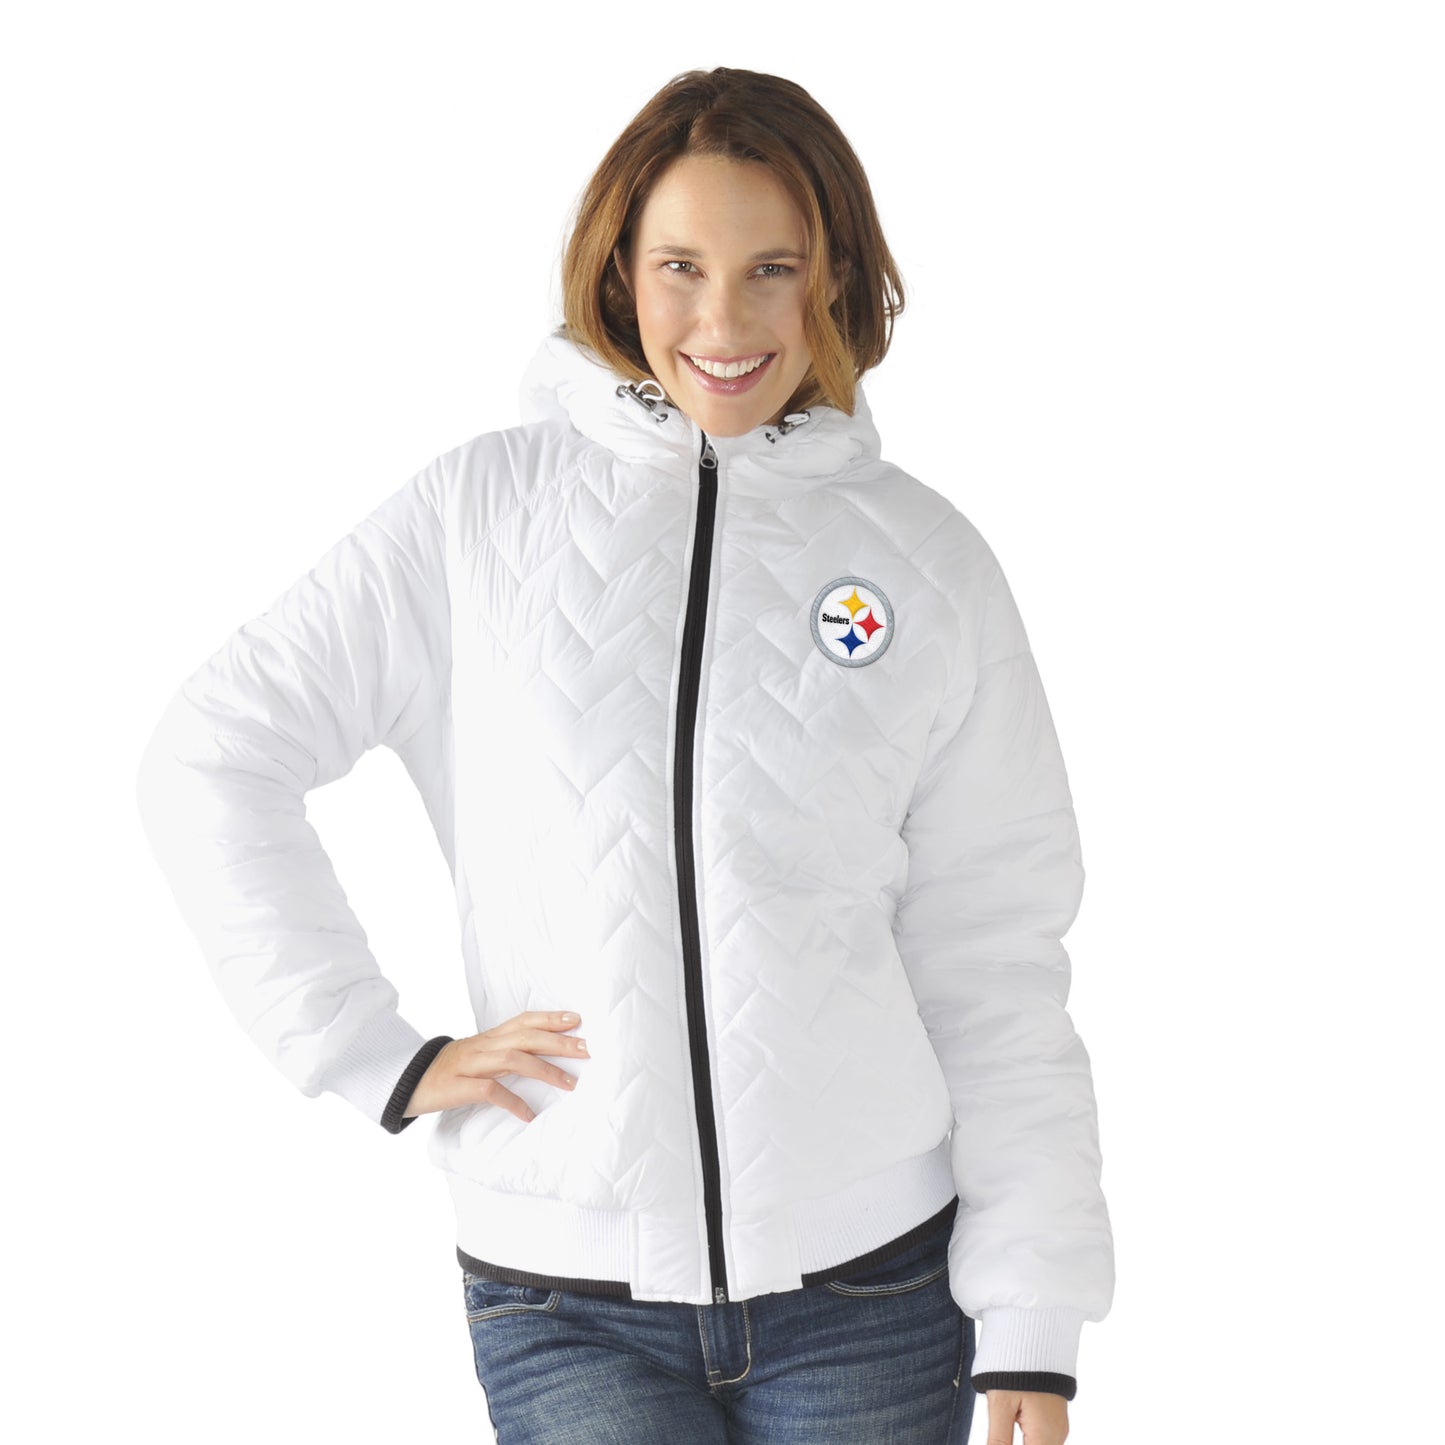 Pittsburgh Steelers Womens Drop Back Jacket Outerwear - White